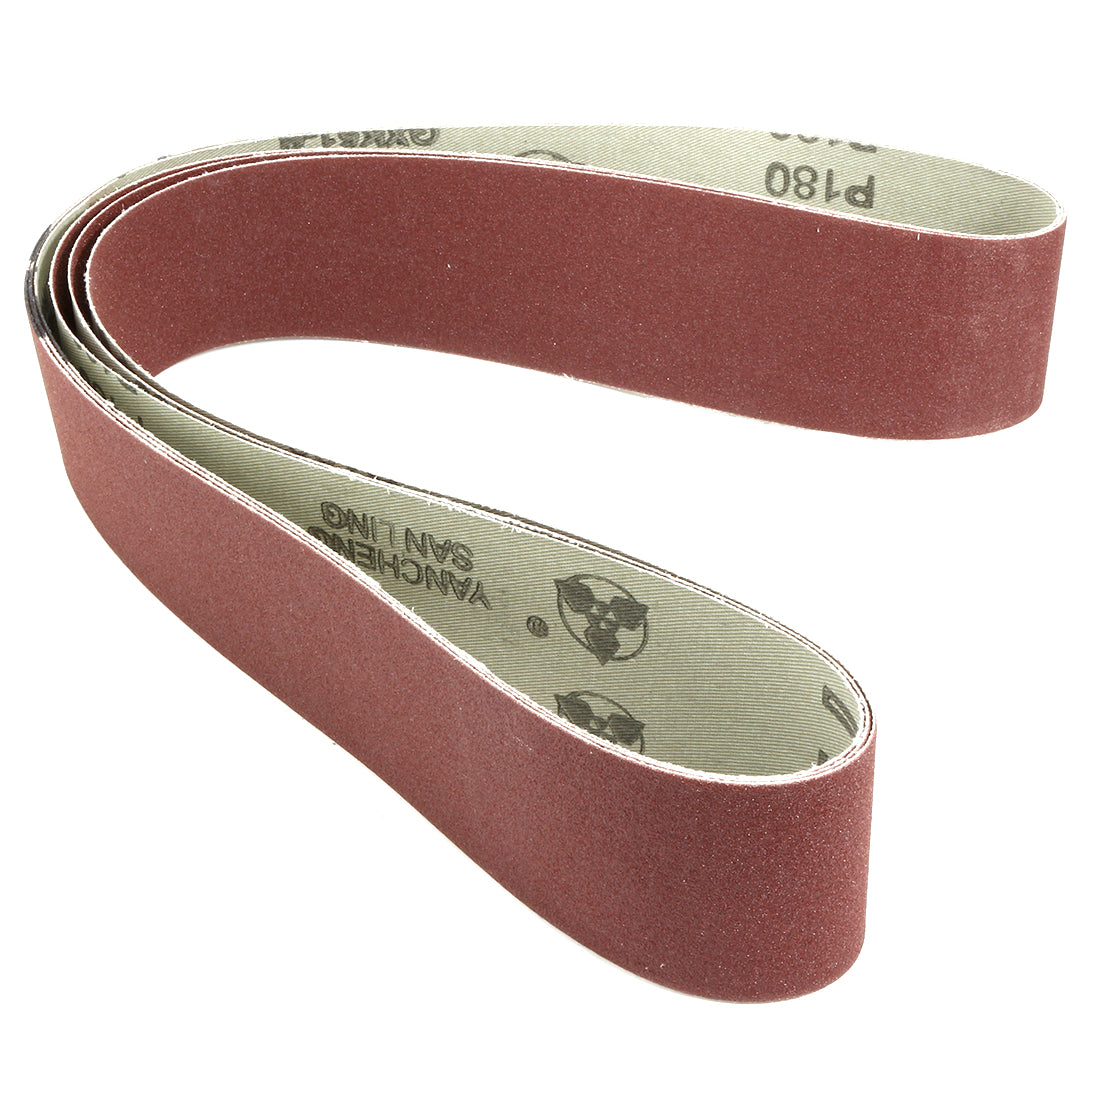 uxcell Uxcell 2-Inch x 42-Inch Aluminum Oxide Sanding Belt 180 Grits Lapped Joint 3pcs